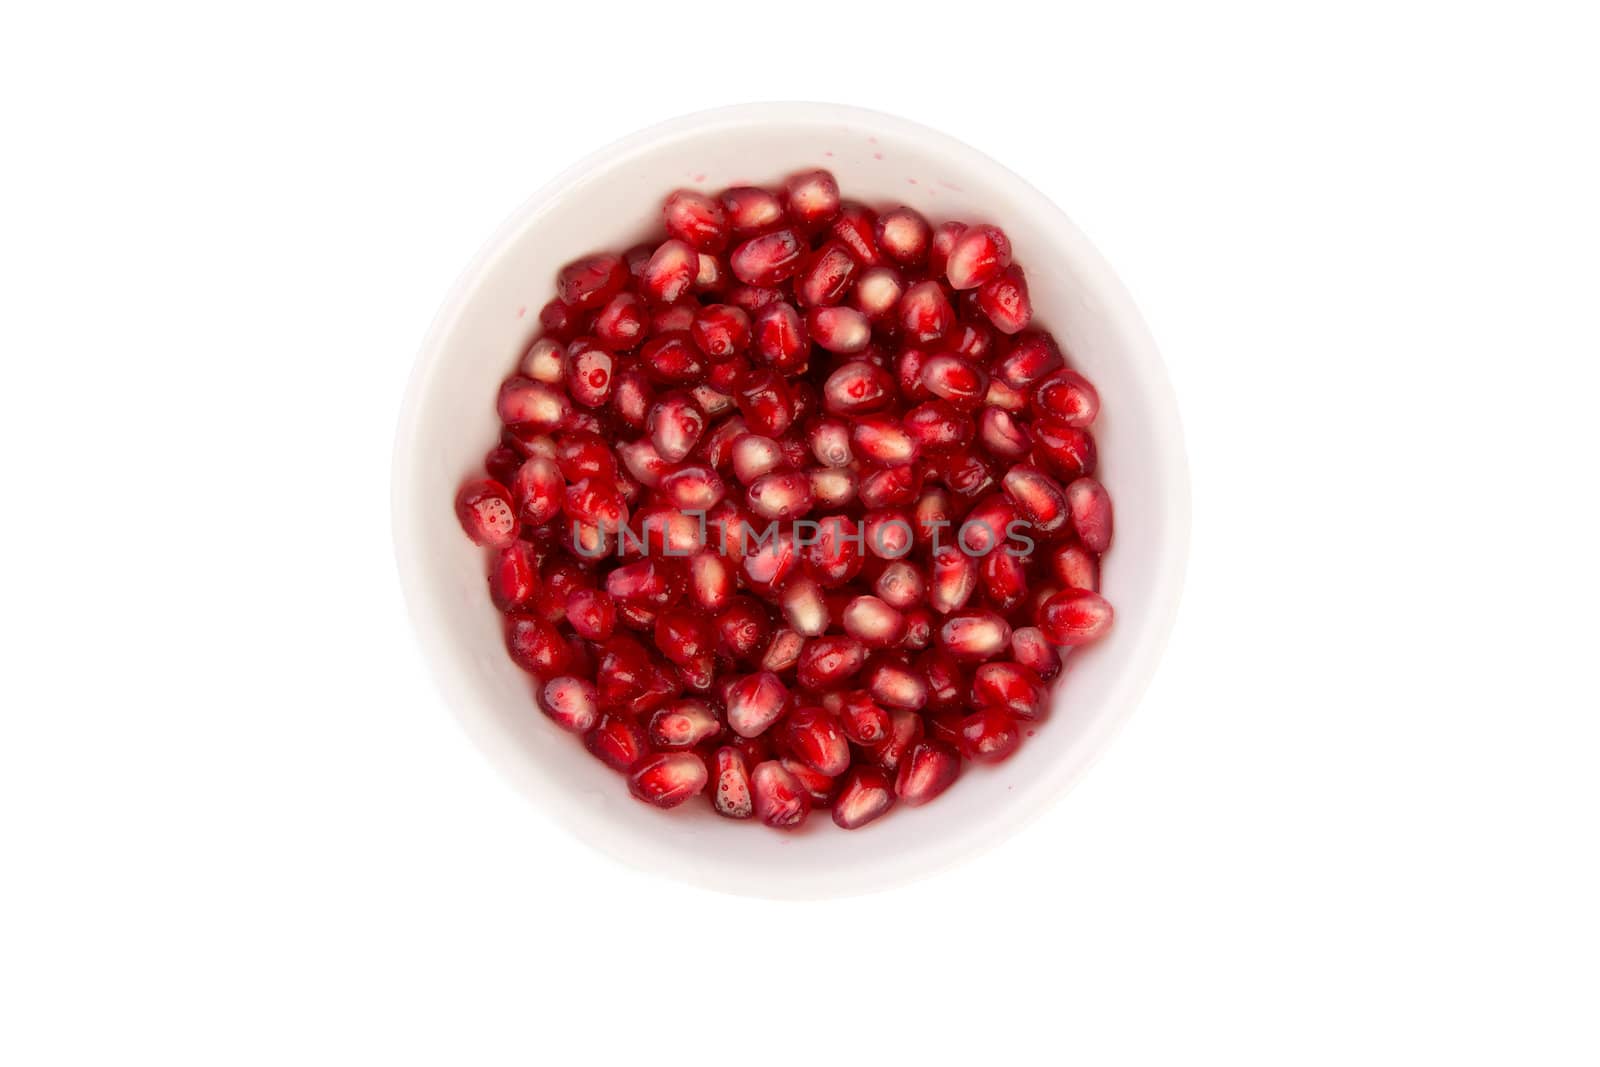 Wet pomegrenate seeds in a white bowl, macro shot from above, isolated on white